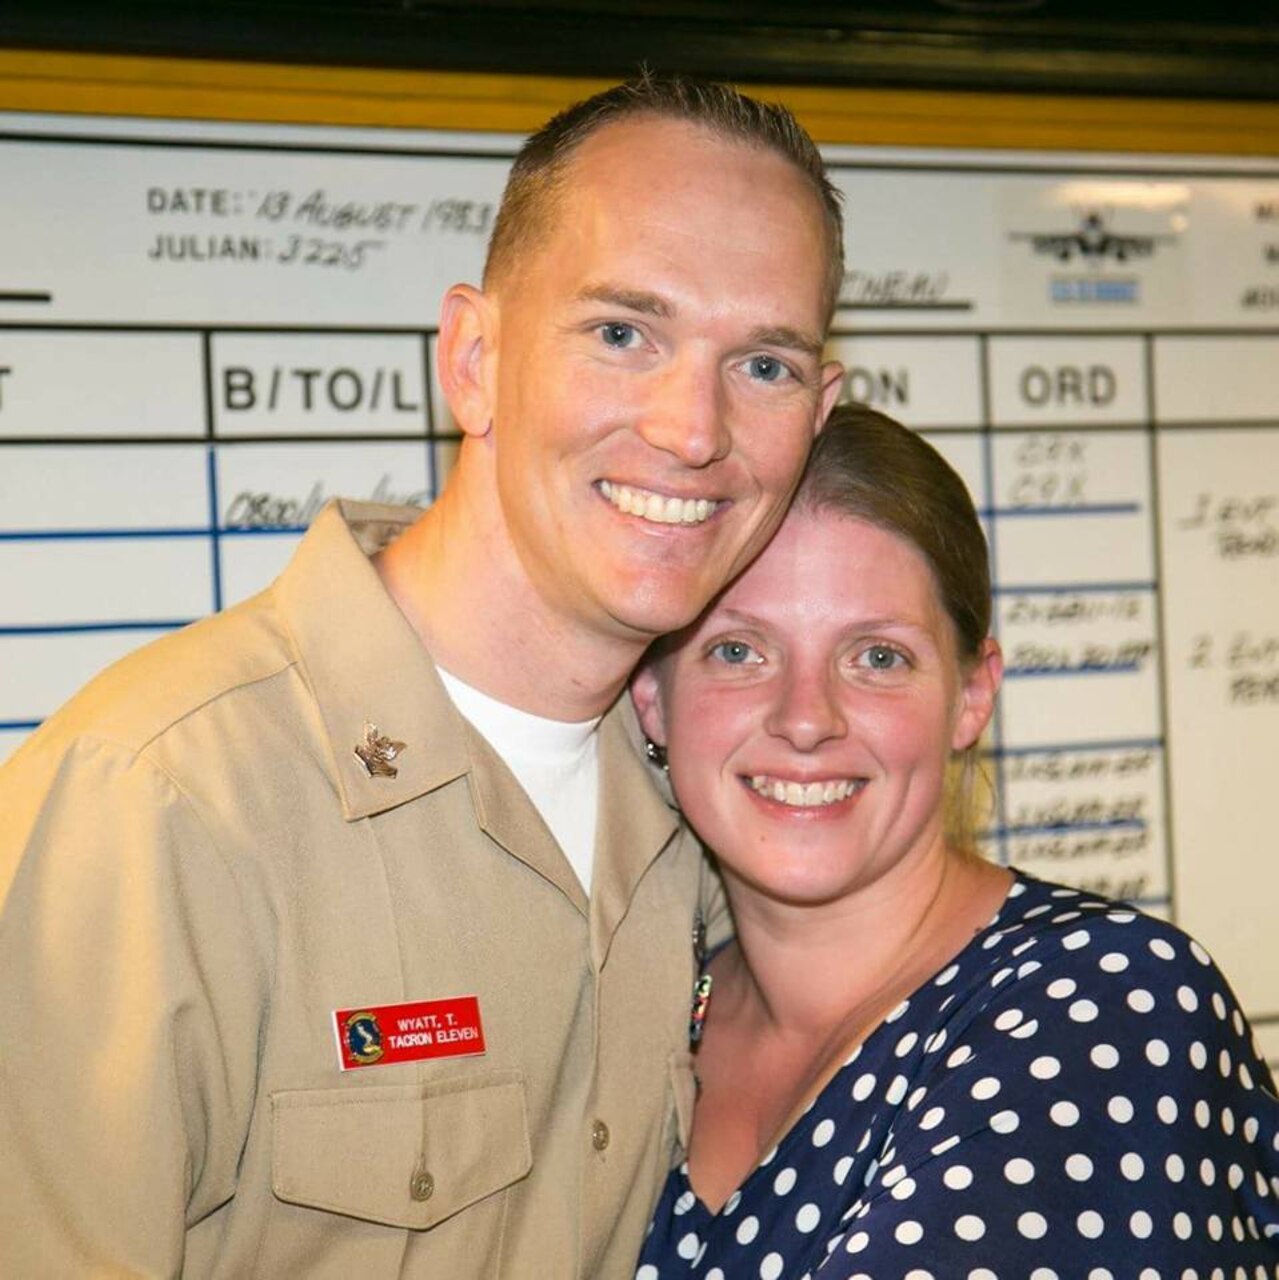 Operations Specialist 1st Class Travis Wyatt and his wife, Teea Wyatt, pose for an undated photo.